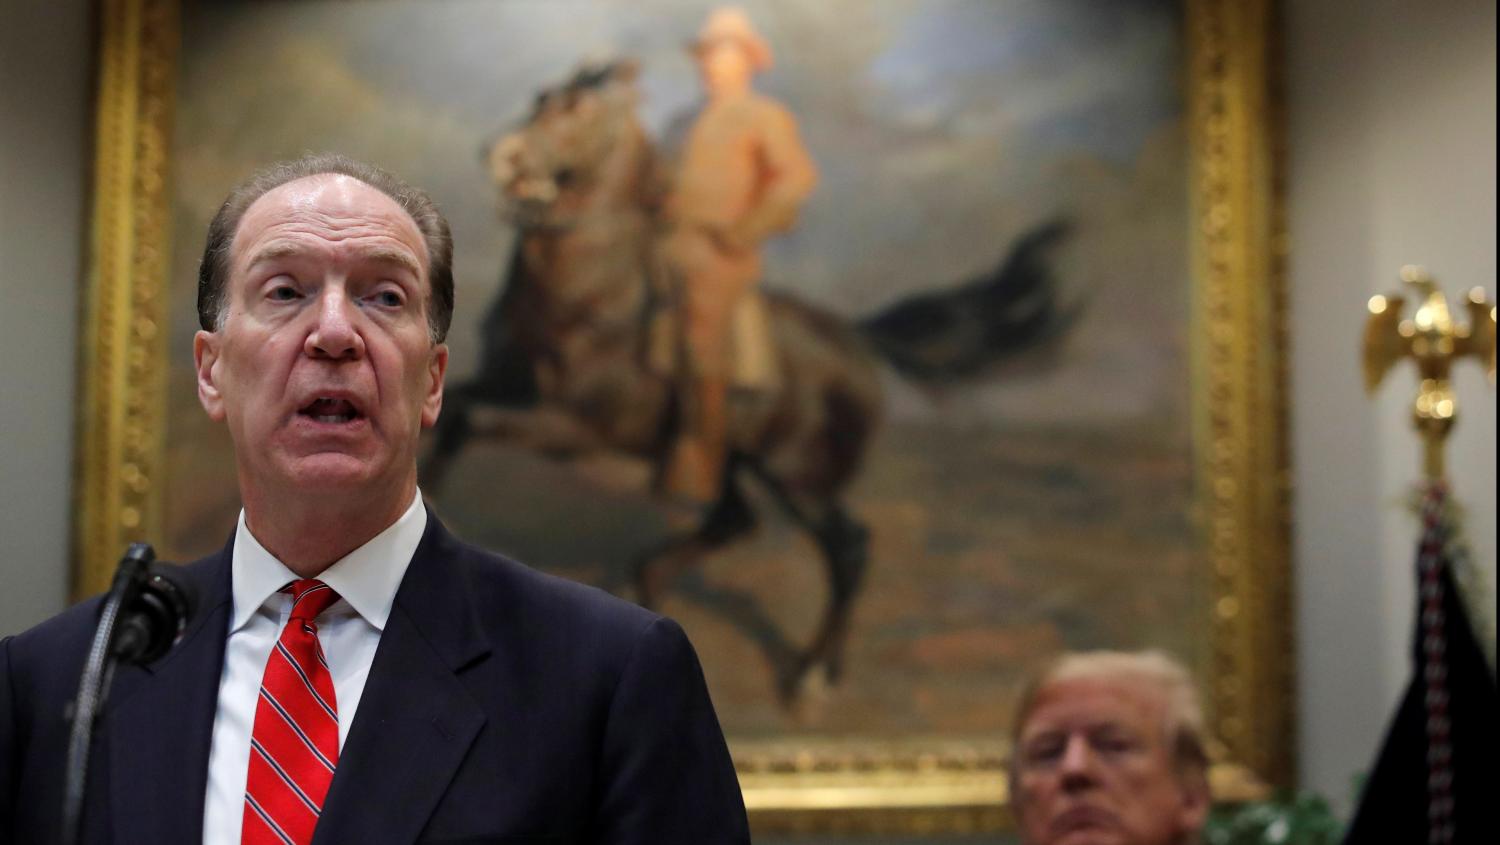 U.S. candidate in election for the next President of the World Bank David Malpass speaks at an event with U.S. President Donald Trump.